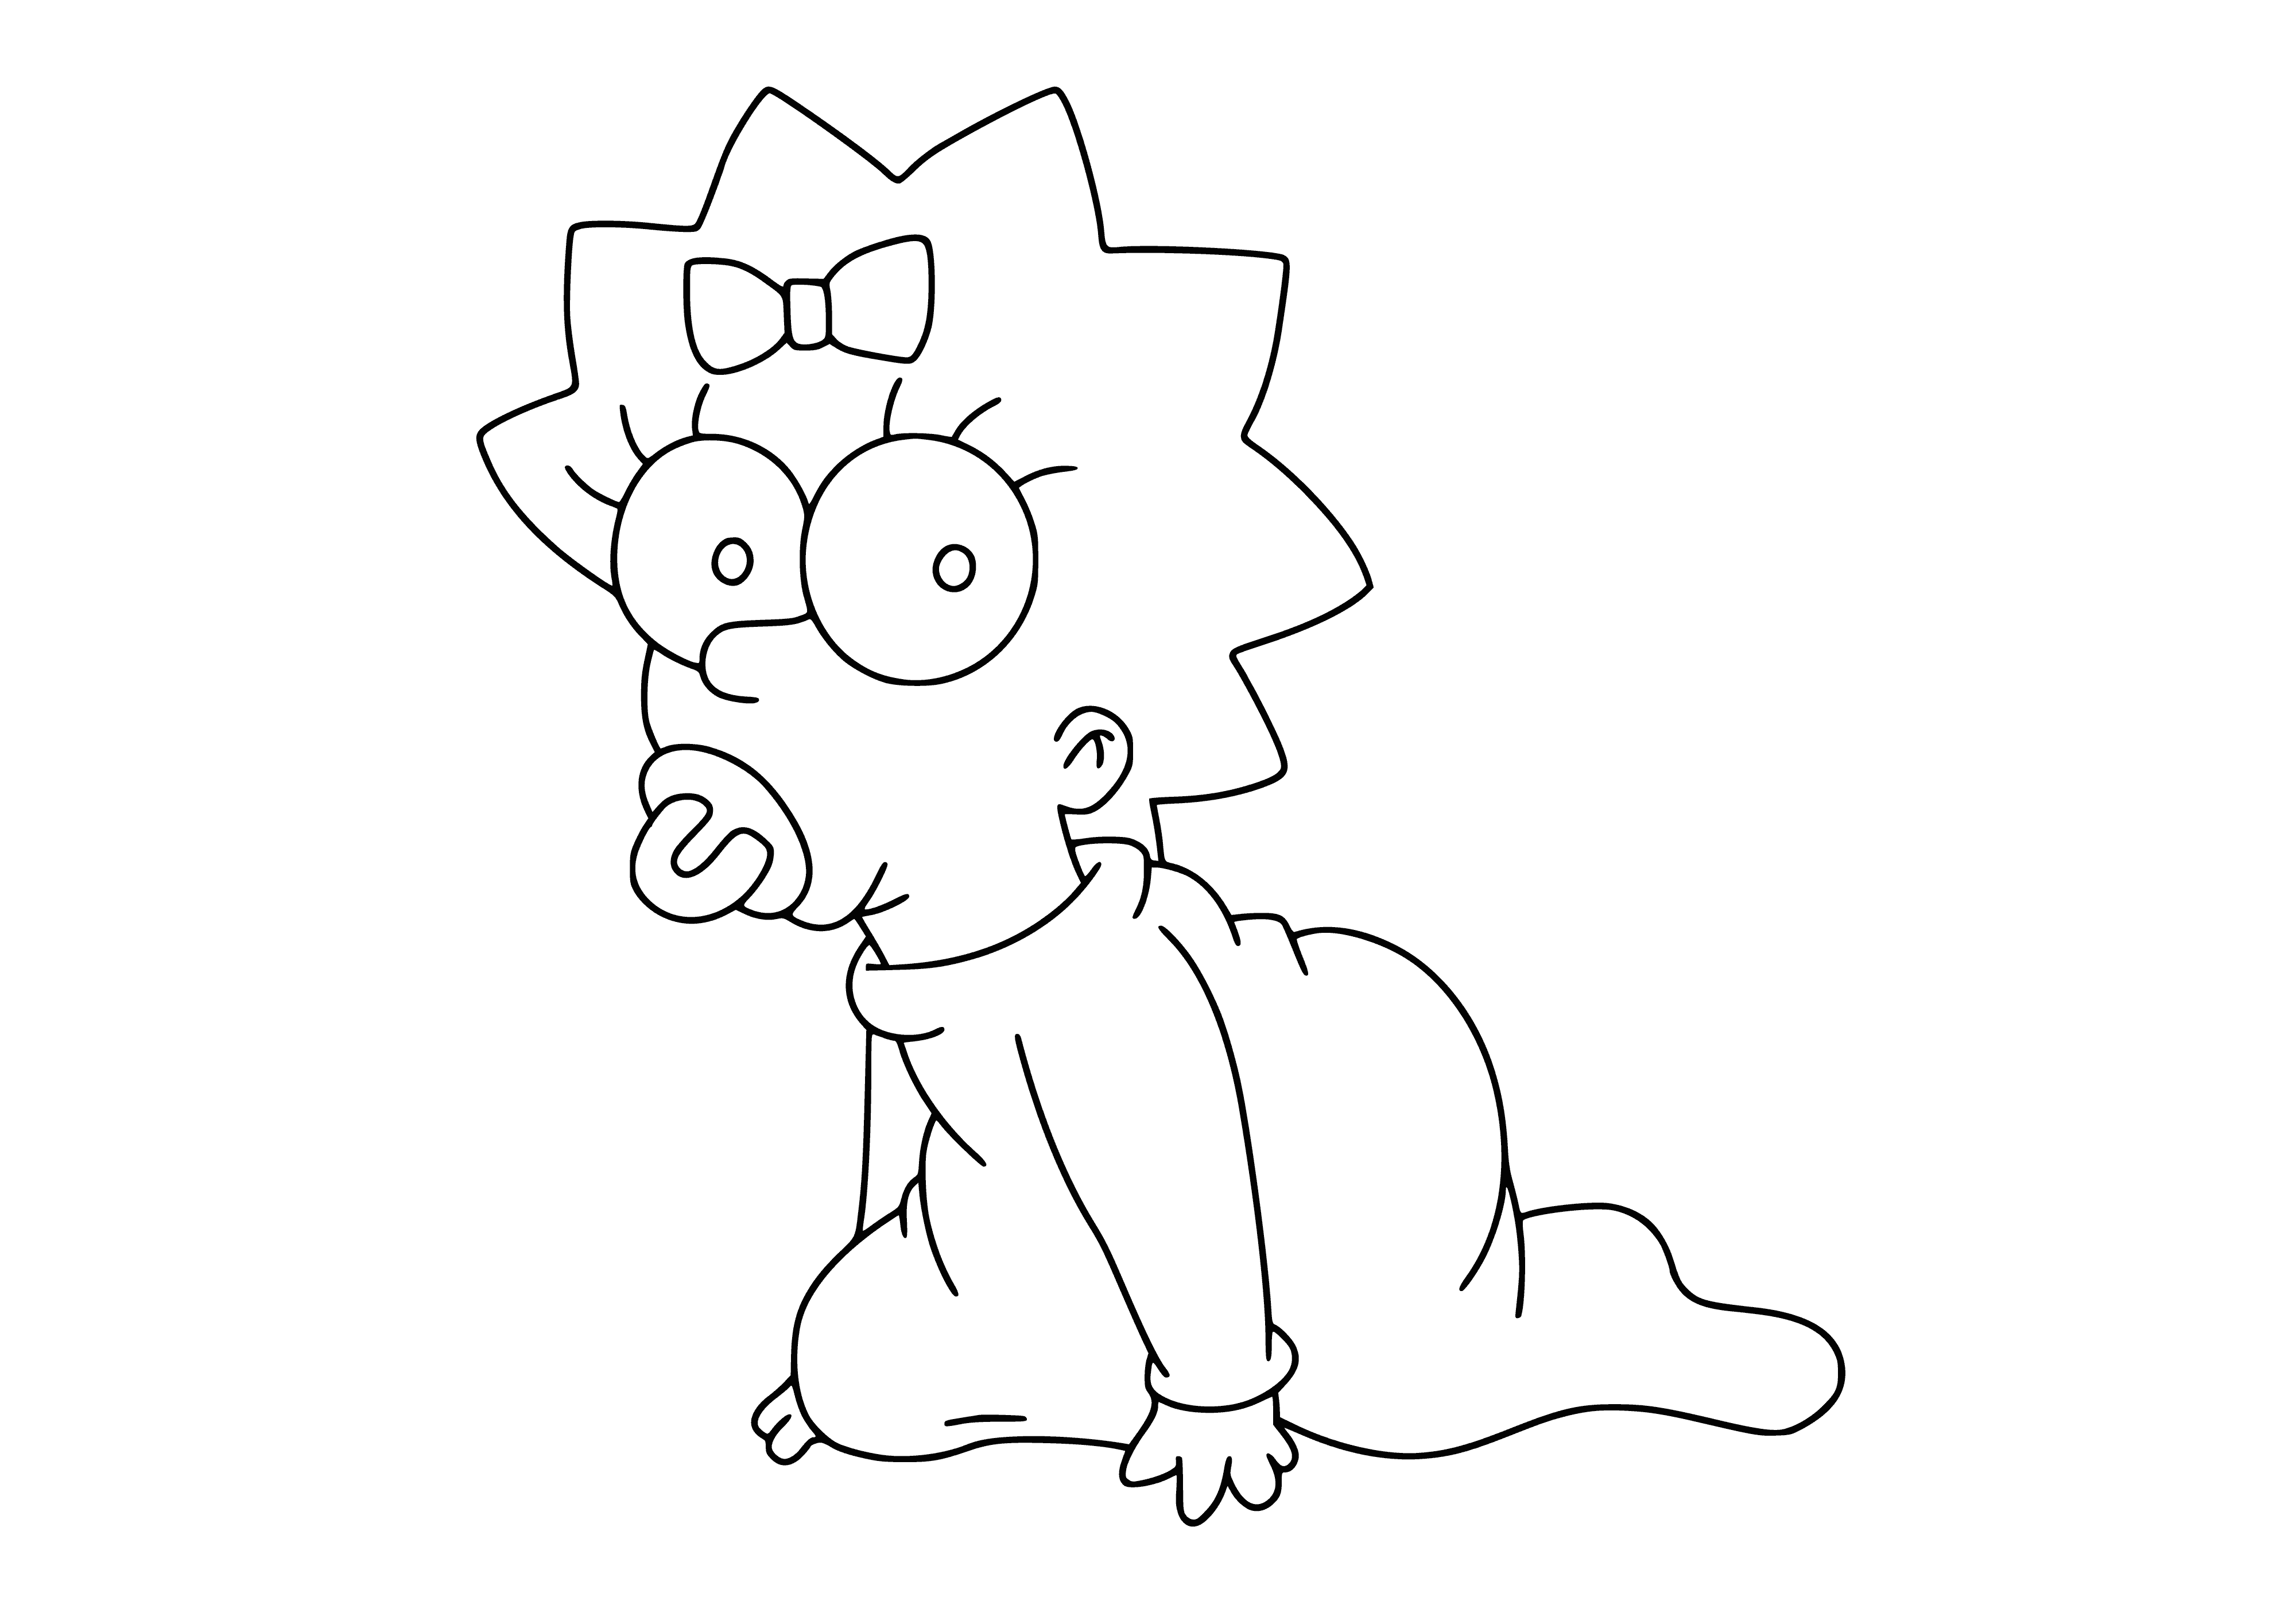 coloring page: Maggie Simpson in high chair looking cute, sporting a bow and white dress. #TheSimpsons